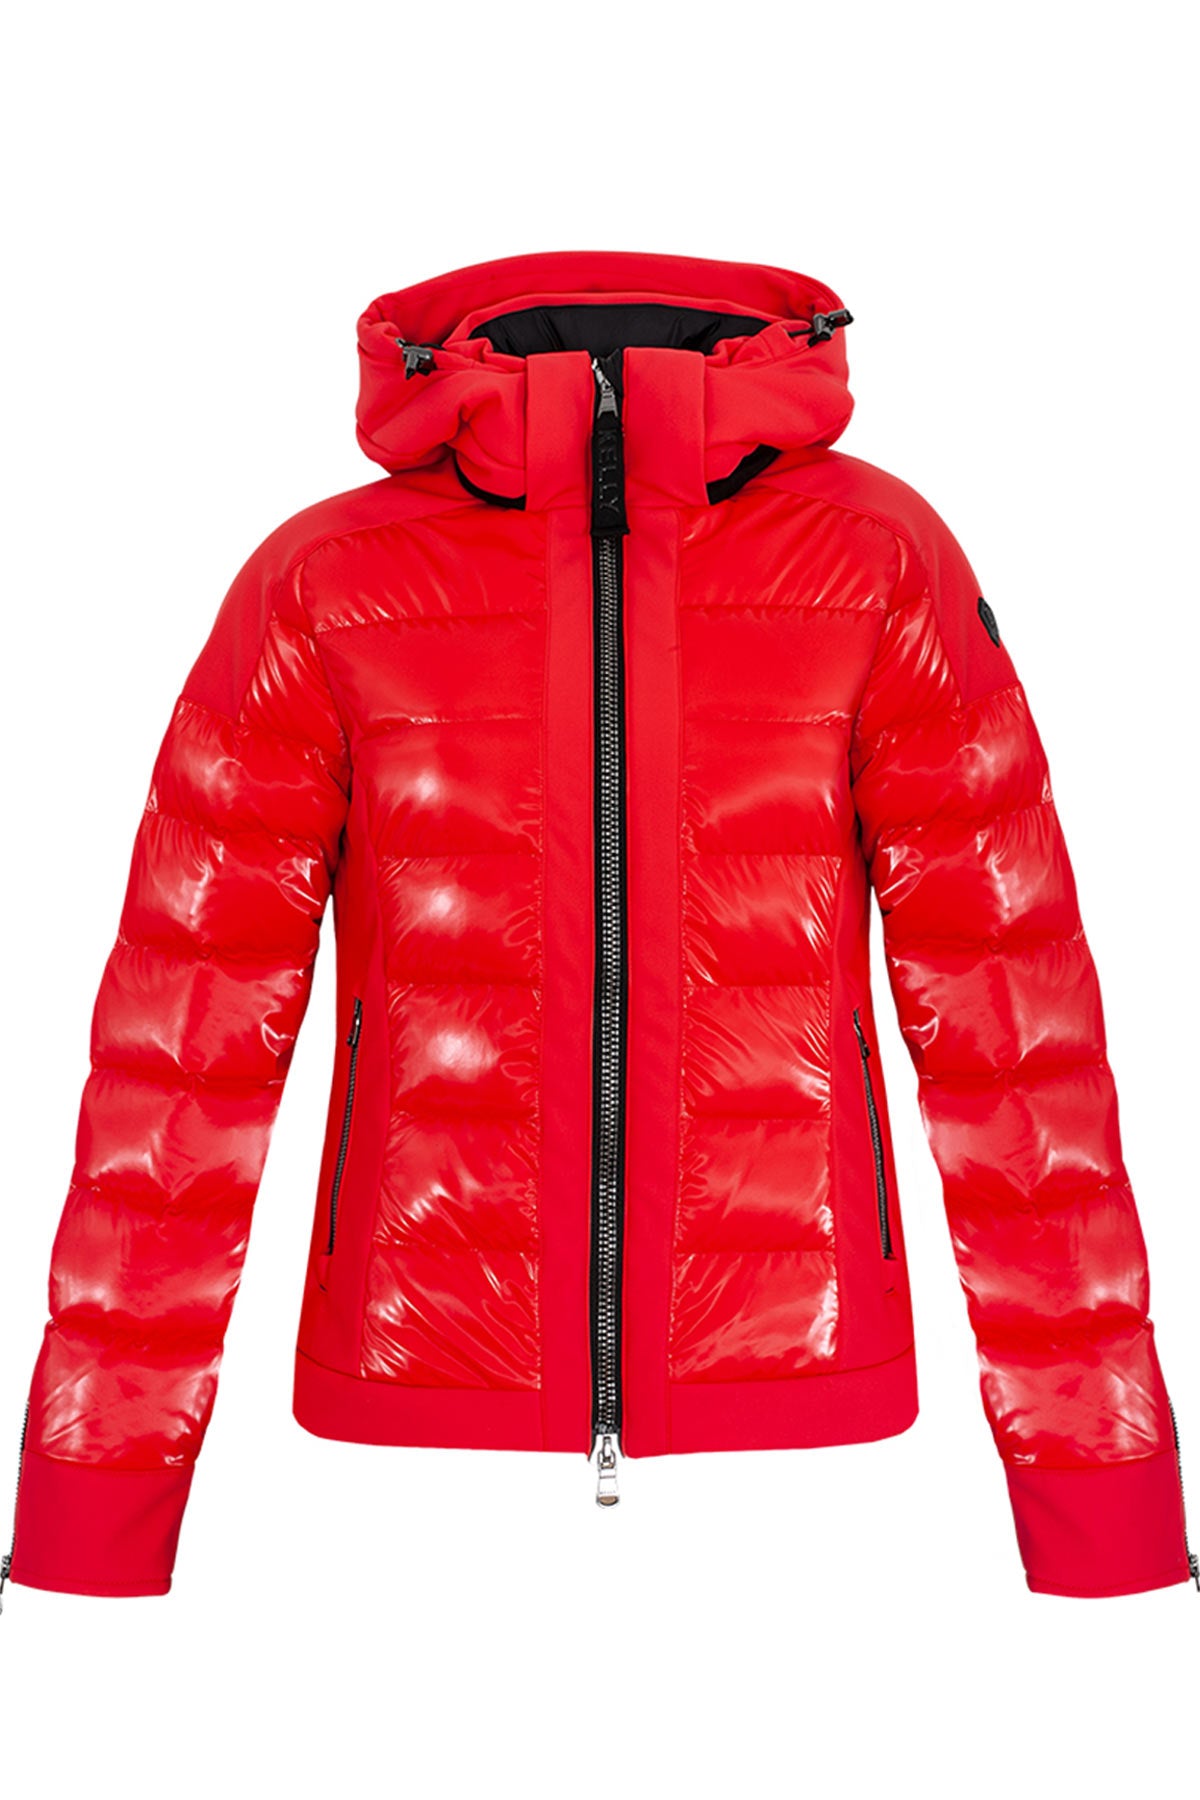 Kelly by Sissy Paris Red Downfilled Ski Jacket from Winternational